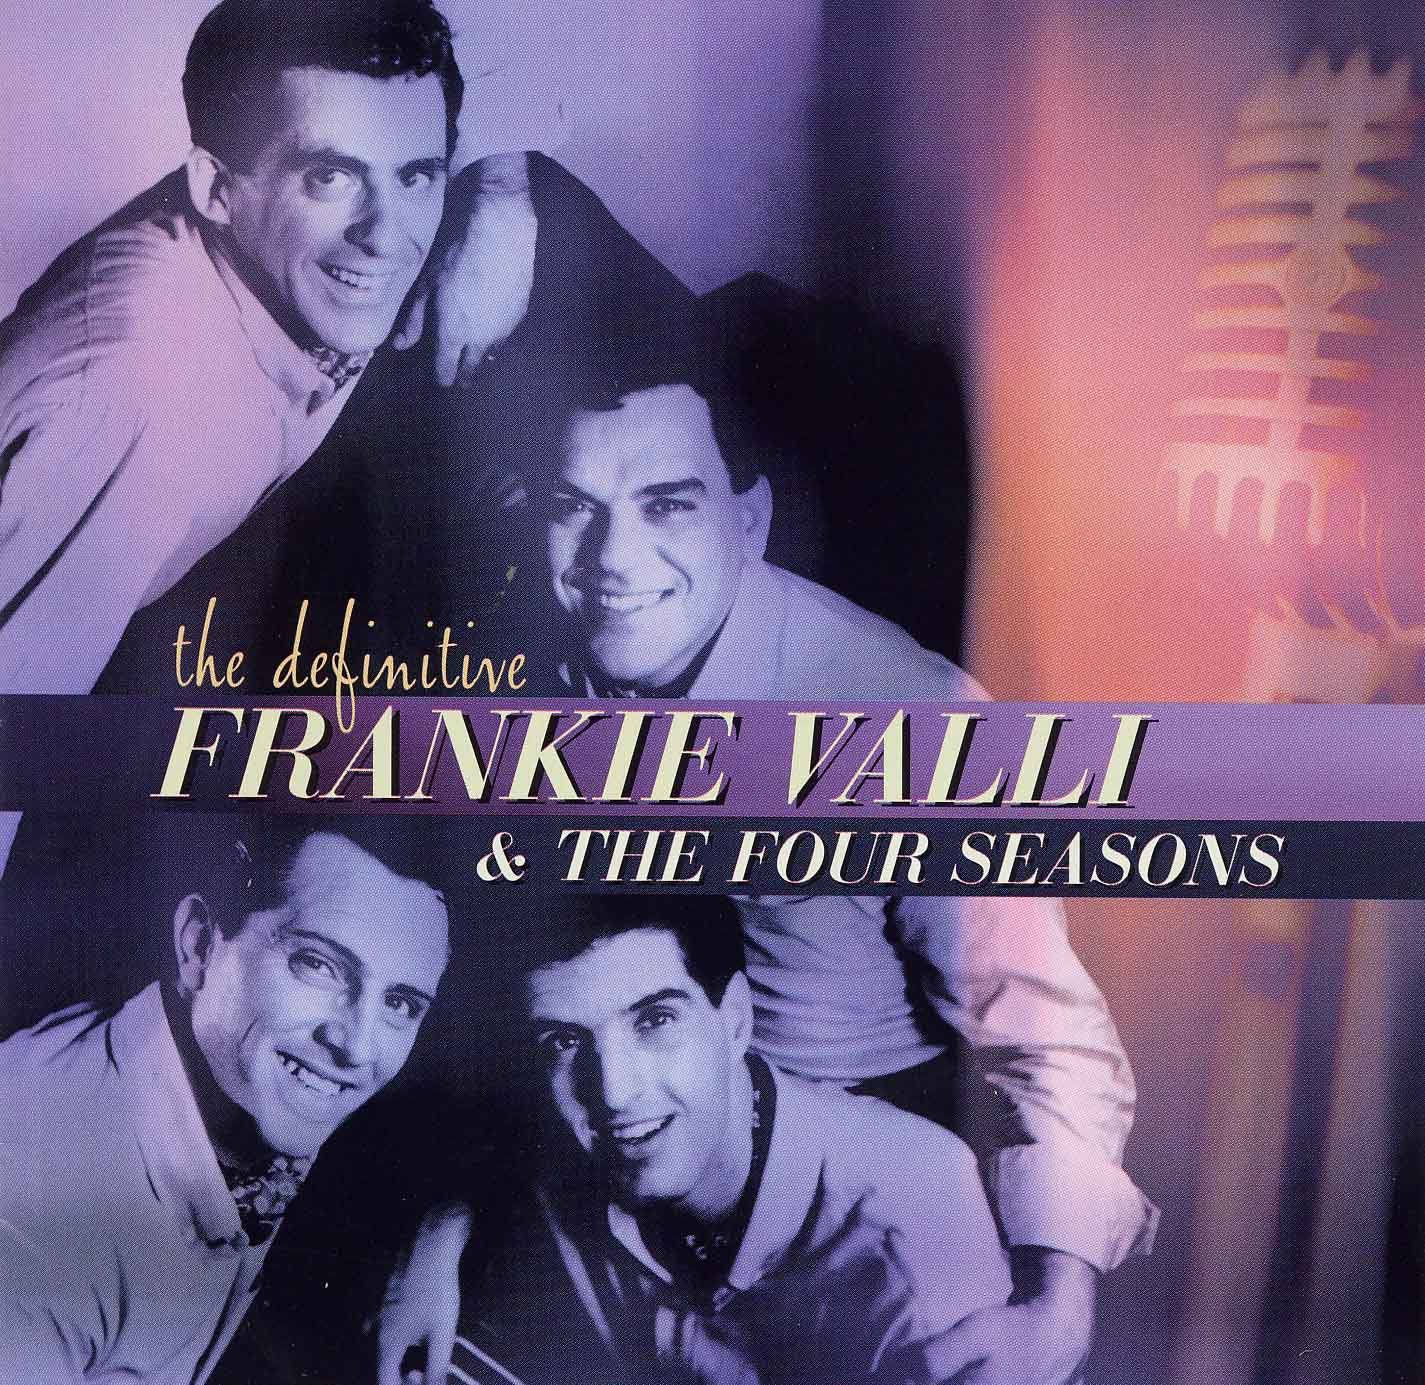 Music Cd Frankie Valli And The Four Seasons Wallpaper